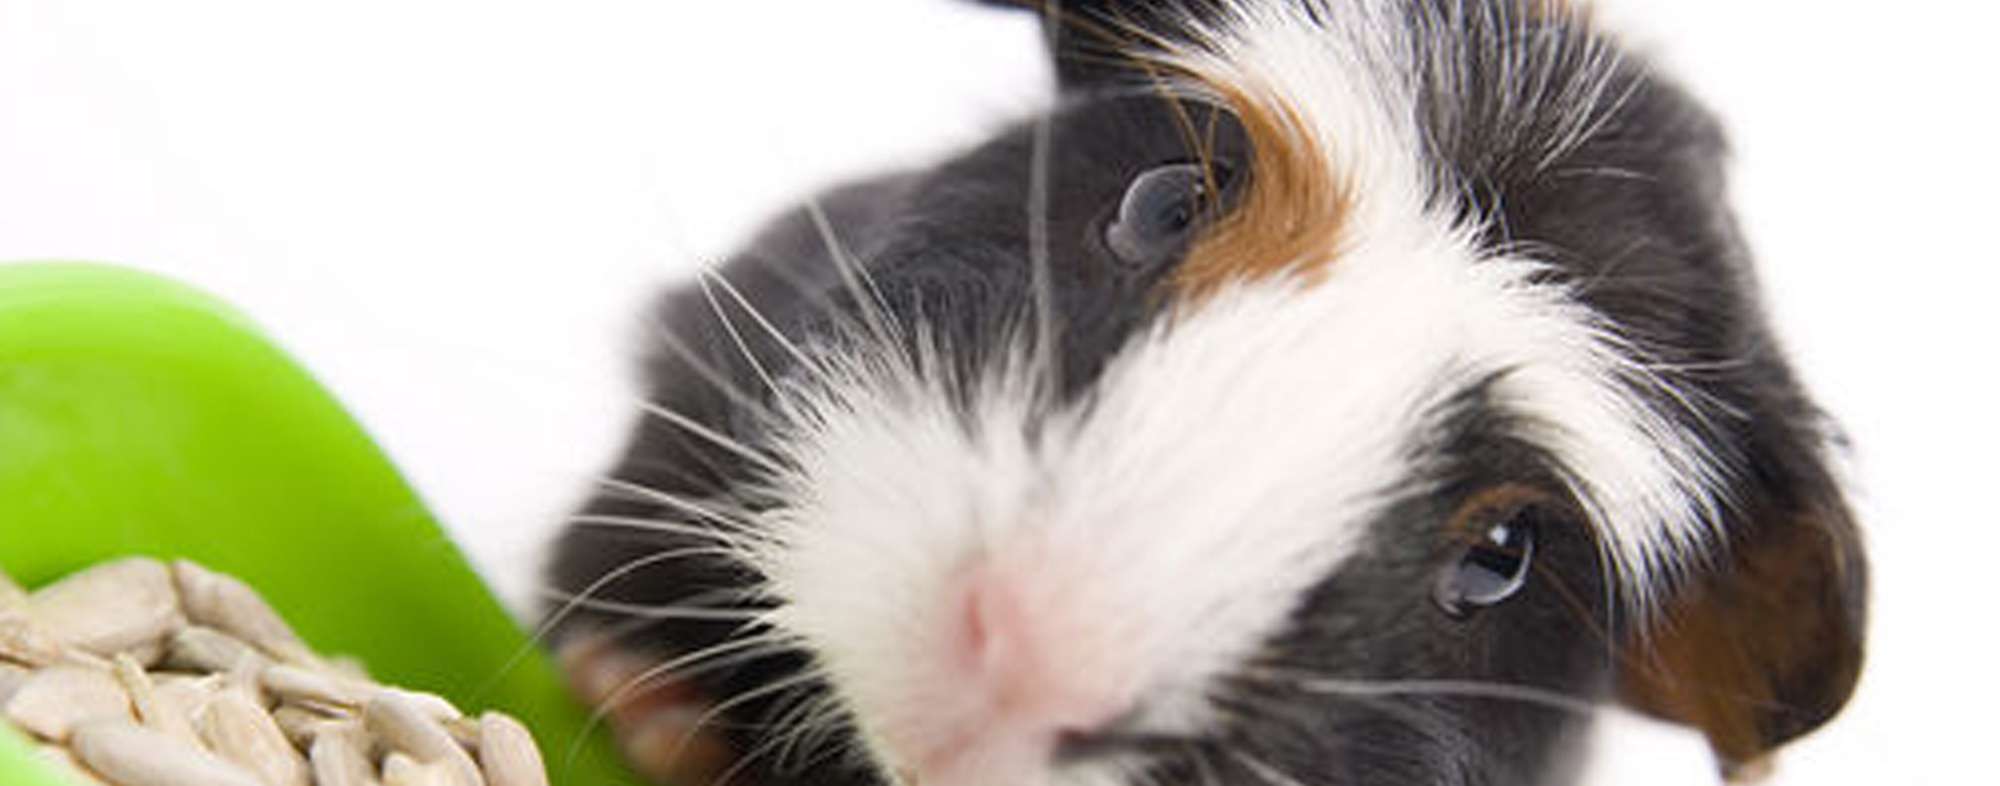 Black-white and brown furred pet guinea pig, eating a supply of seeds